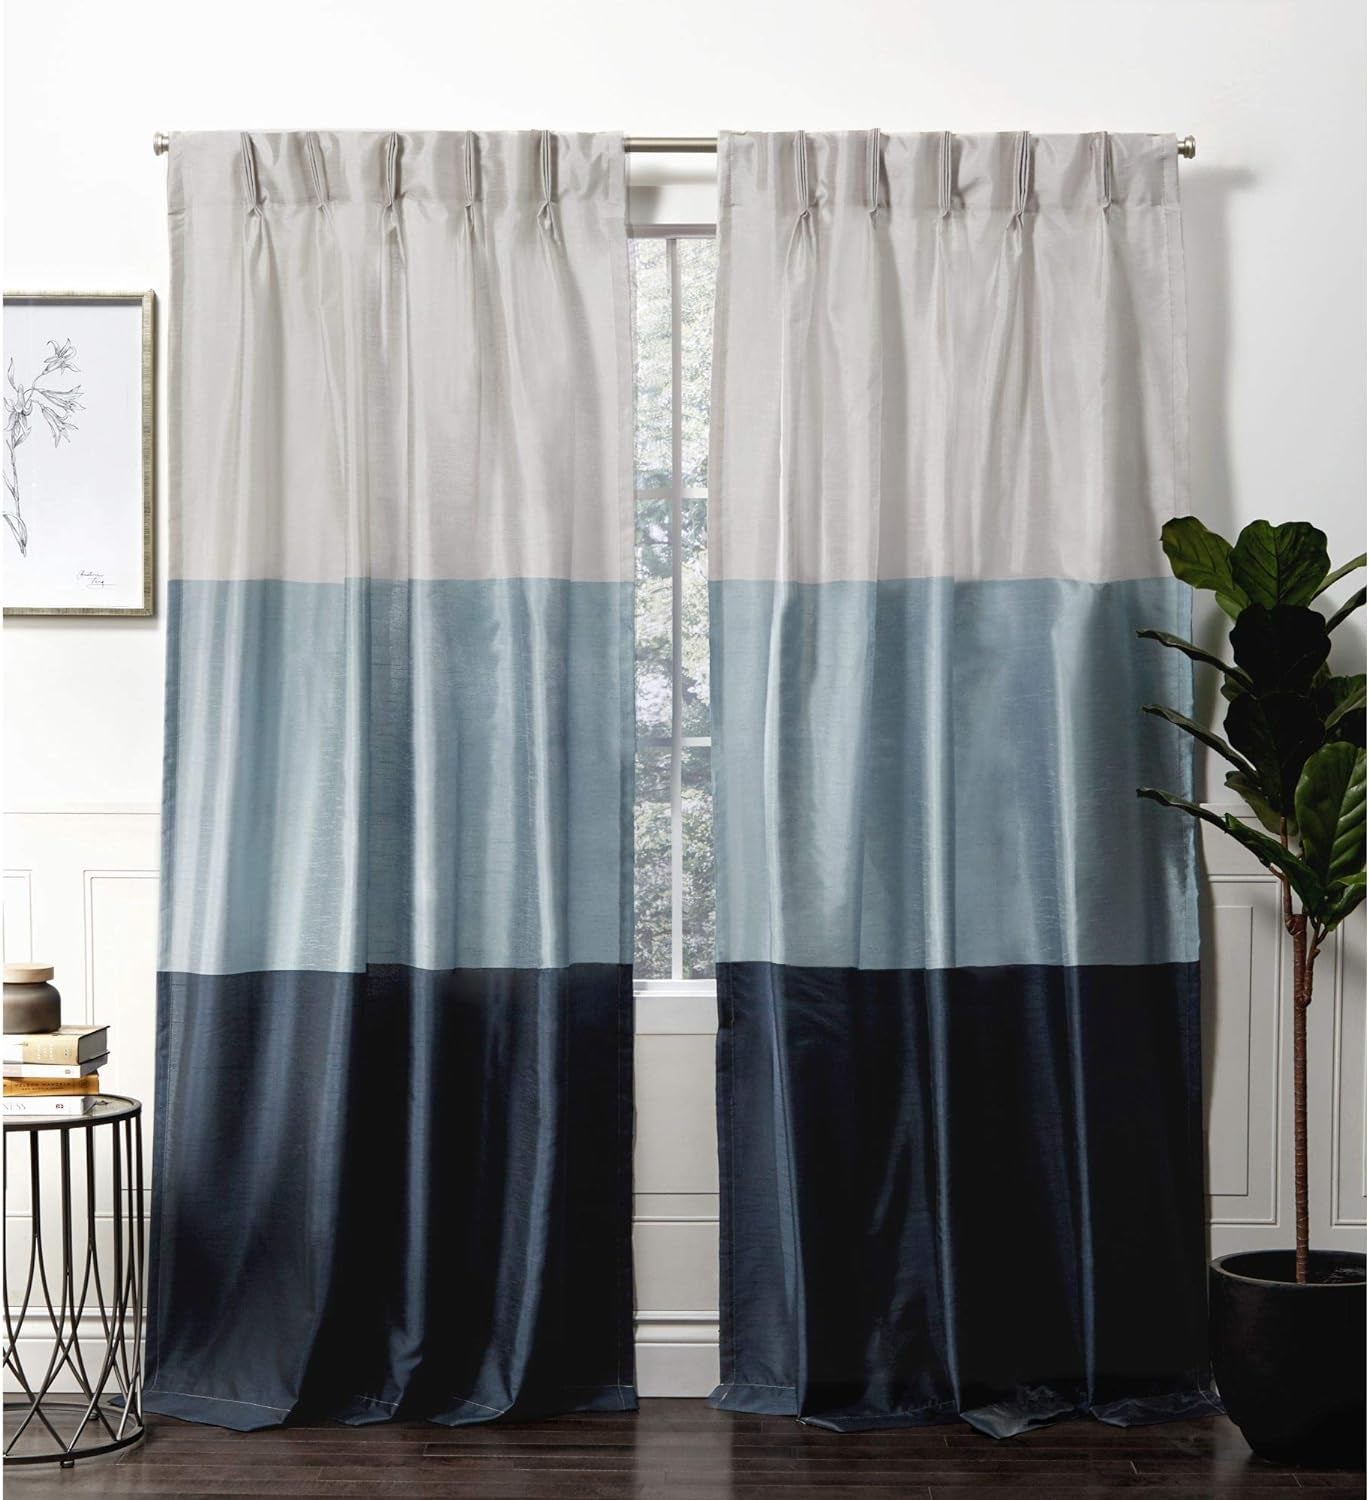 Exclusive Home Curtains Chateau Light Filtering Pinch Pleat Curtain Panels, 96" Length, Blush, Set of 2  Exclusive Home Curtains Indigo 27X84 